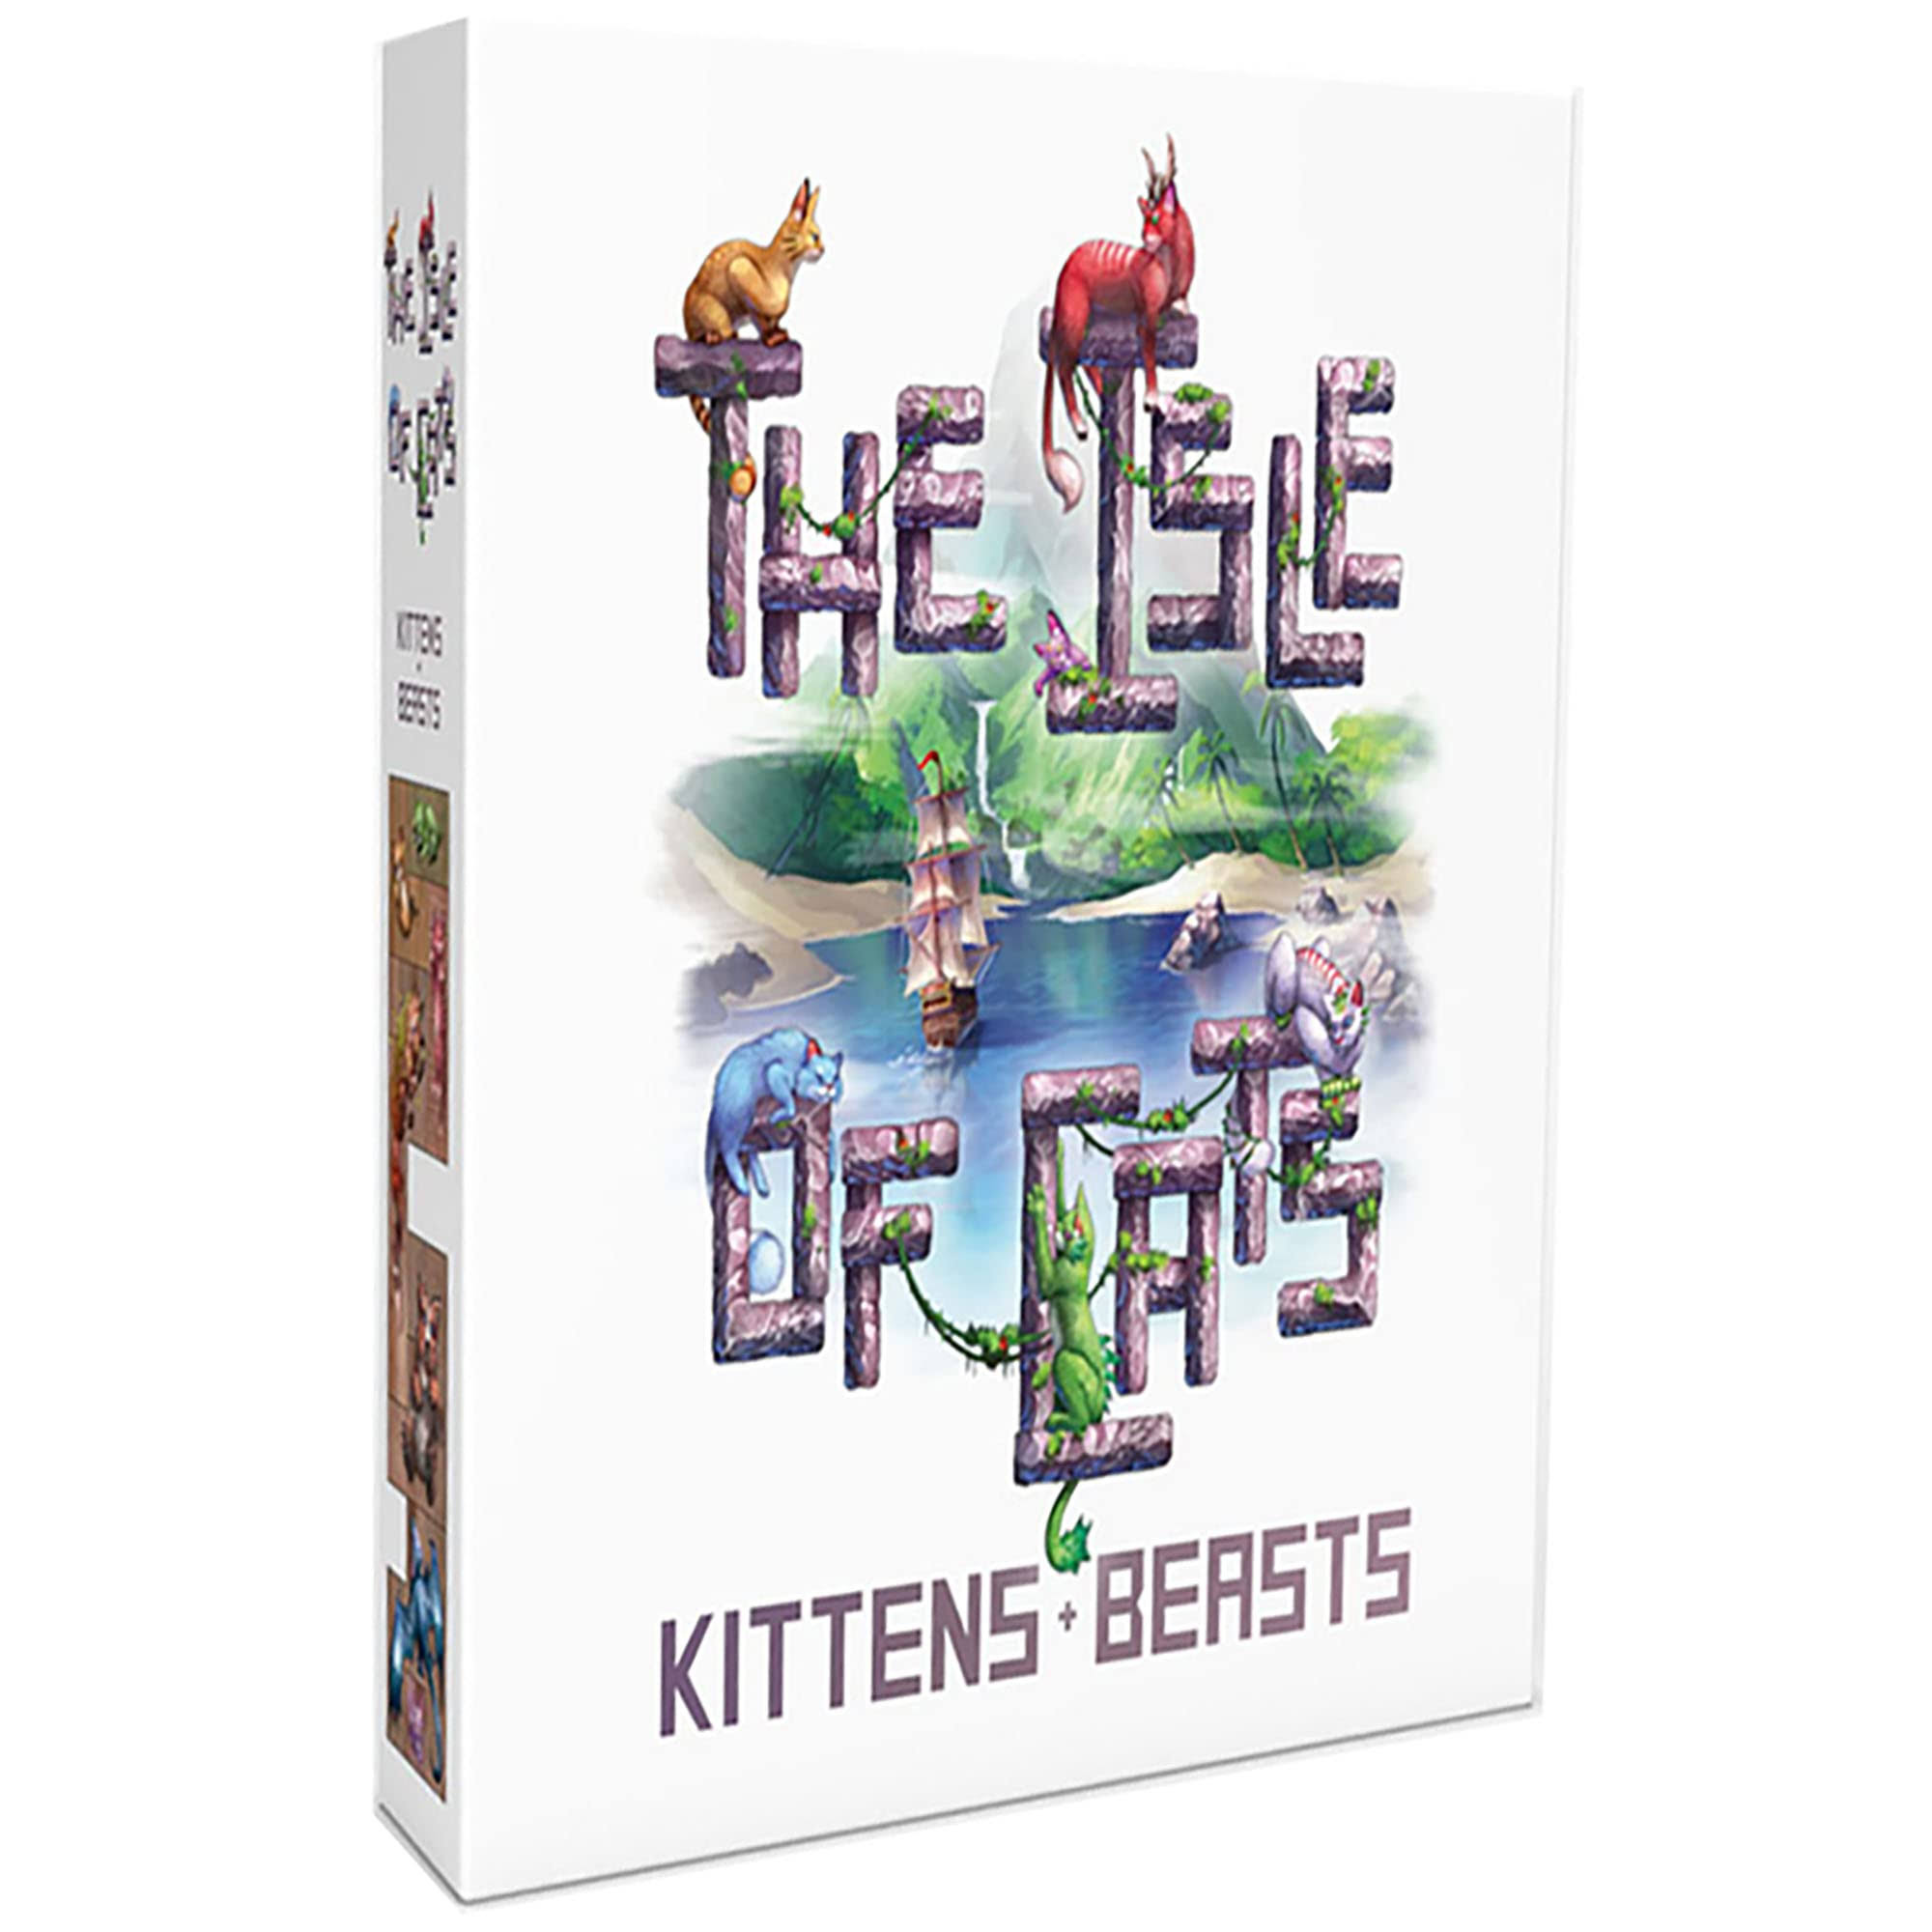 The Isle of Cats Kittens and Beasts Expansion